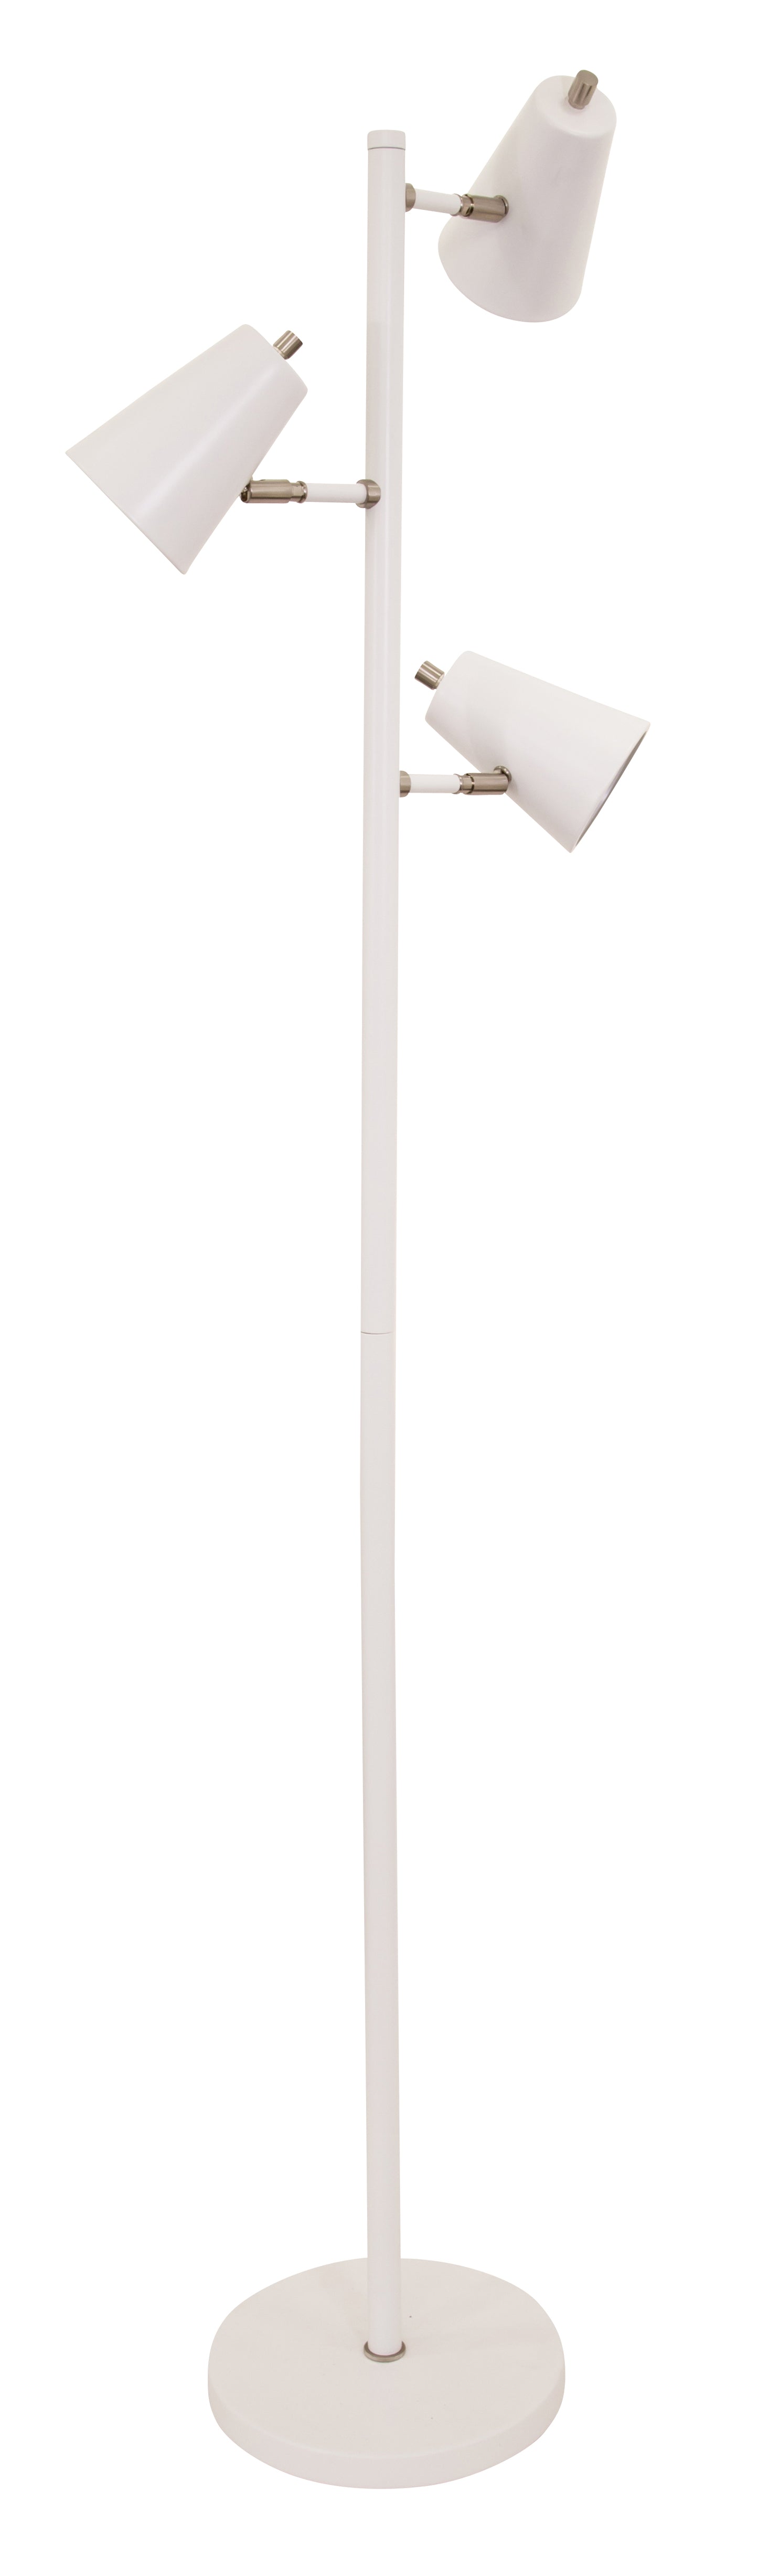 House of Troy Kirby LED Three Light Floor Lamp White Satin Nickel Accents K130-WT